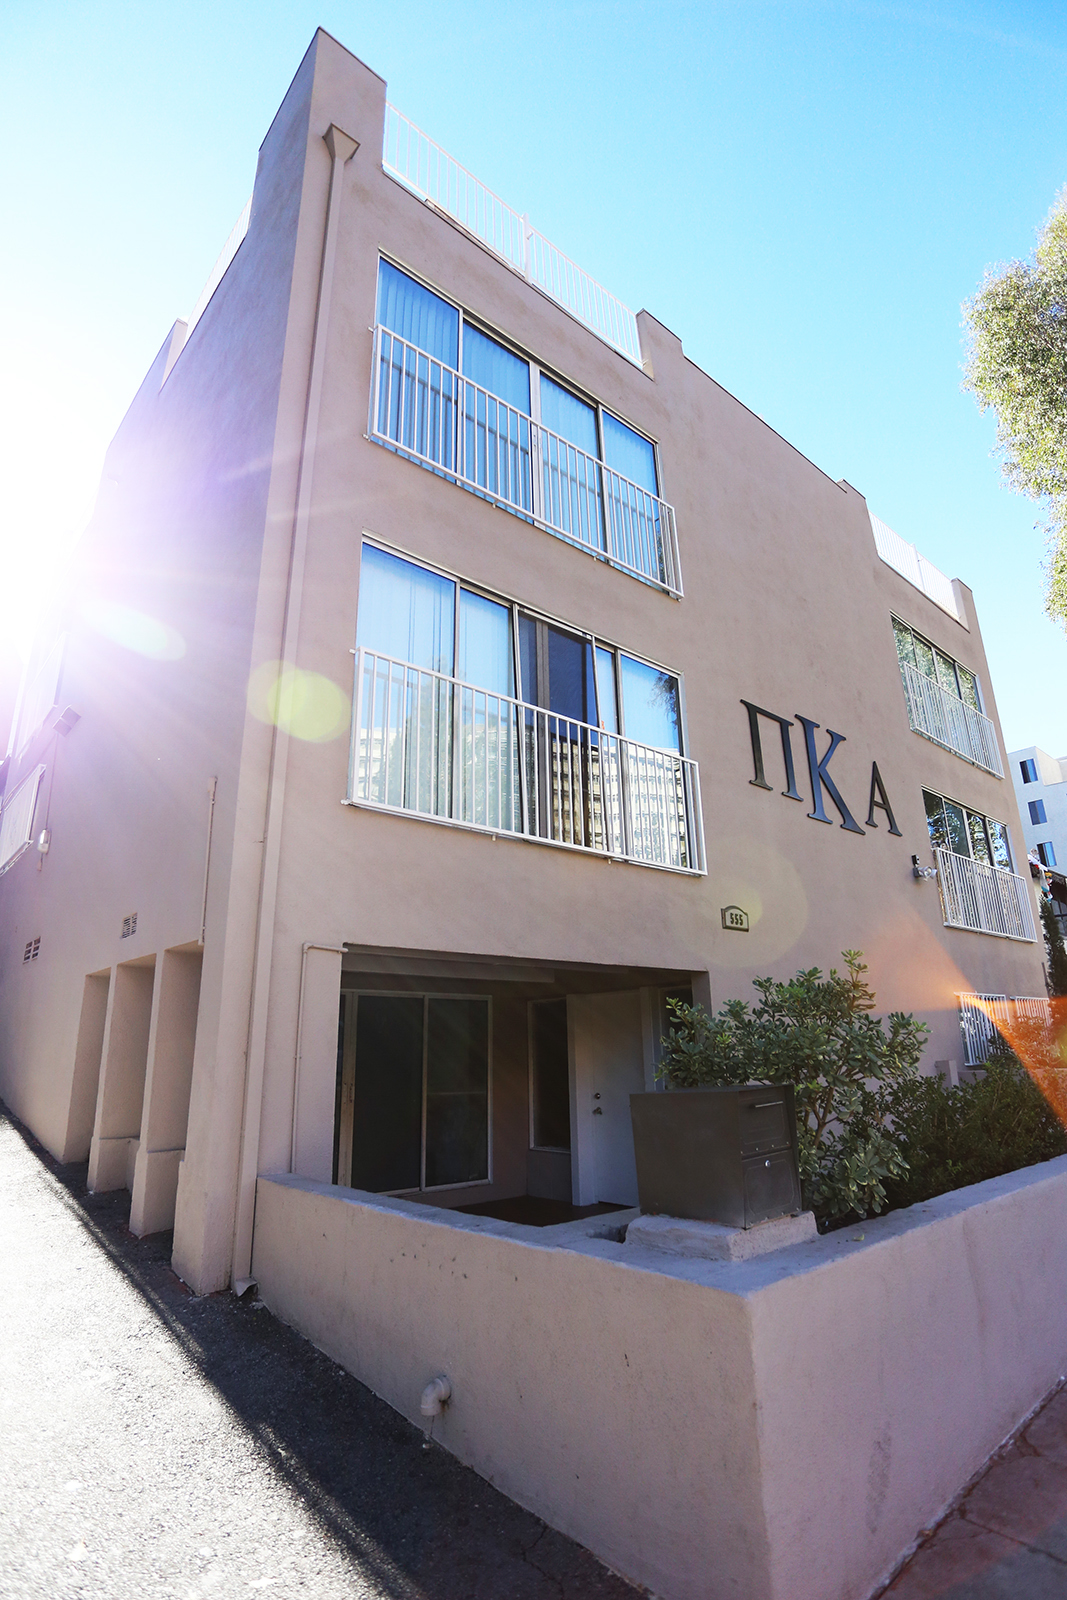 radar Lelie Vroegst Pi Kappa Alpha fraternity returns to UCLA, emphasizes its values in  recruitment - Daily Bruin